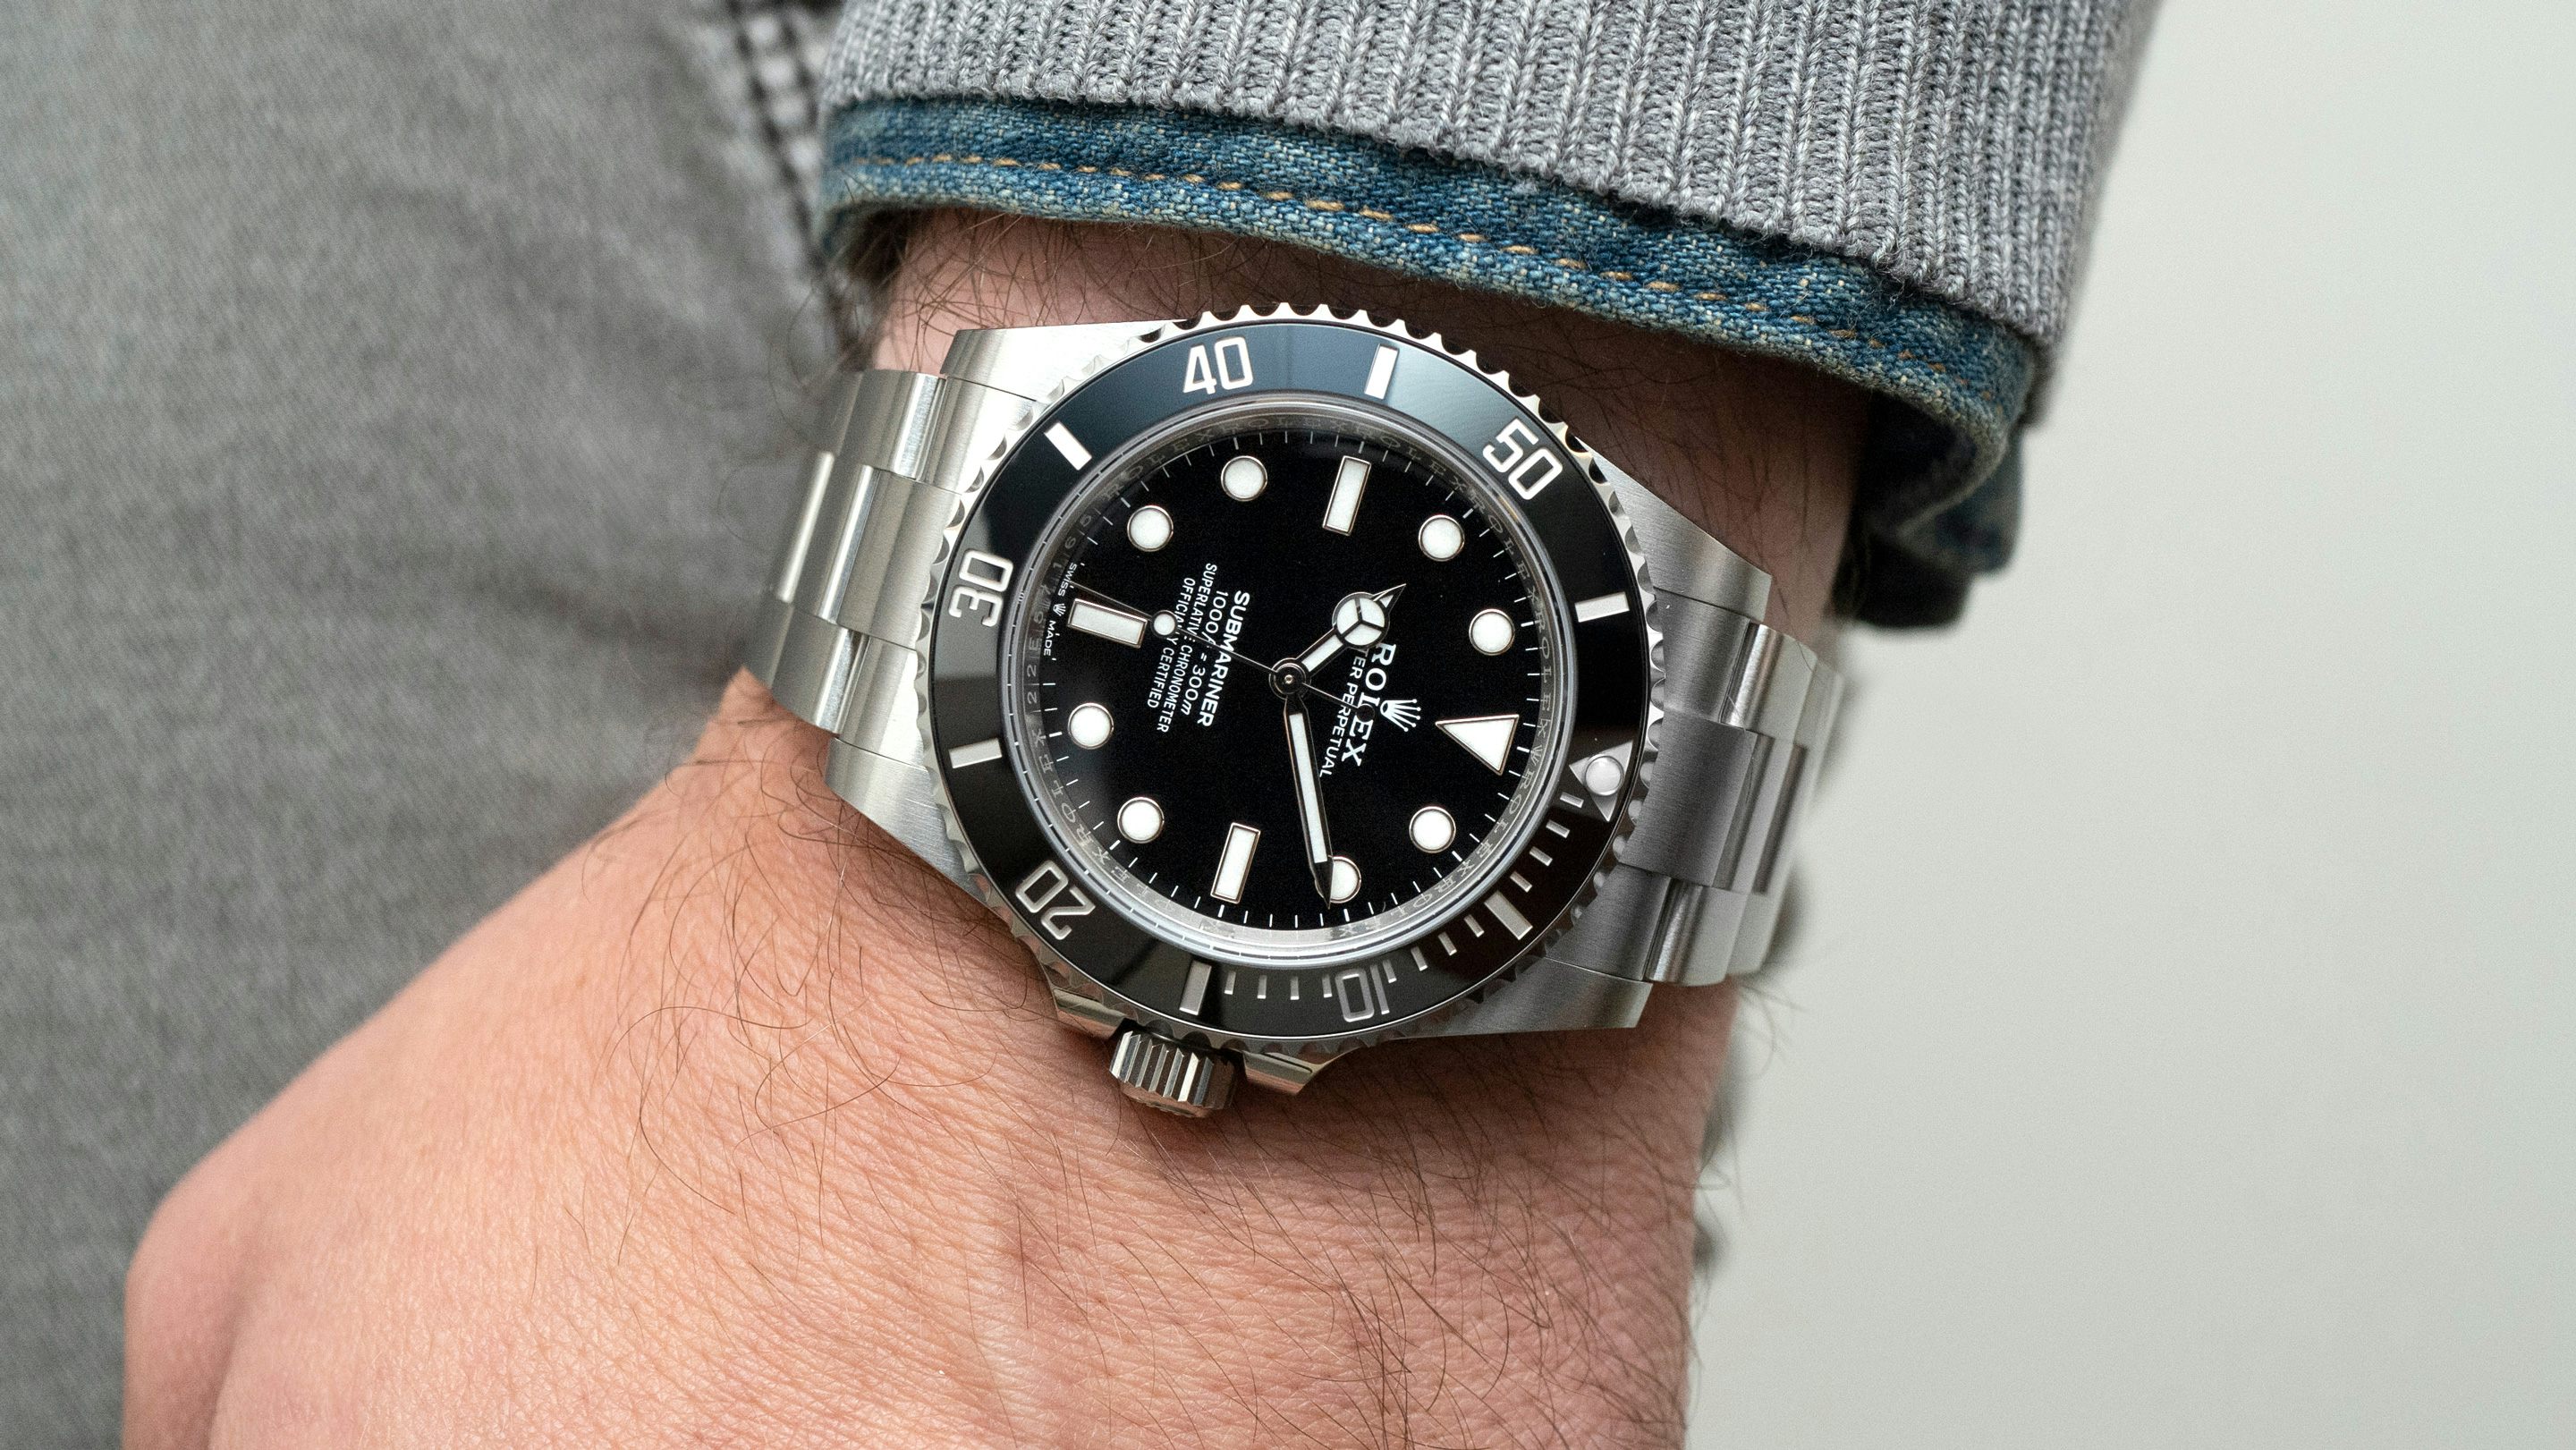 Vedholdende Trickle bureau In-Depth: Five Things I Learned From The 2020 Rolex Releases - Hodinkee